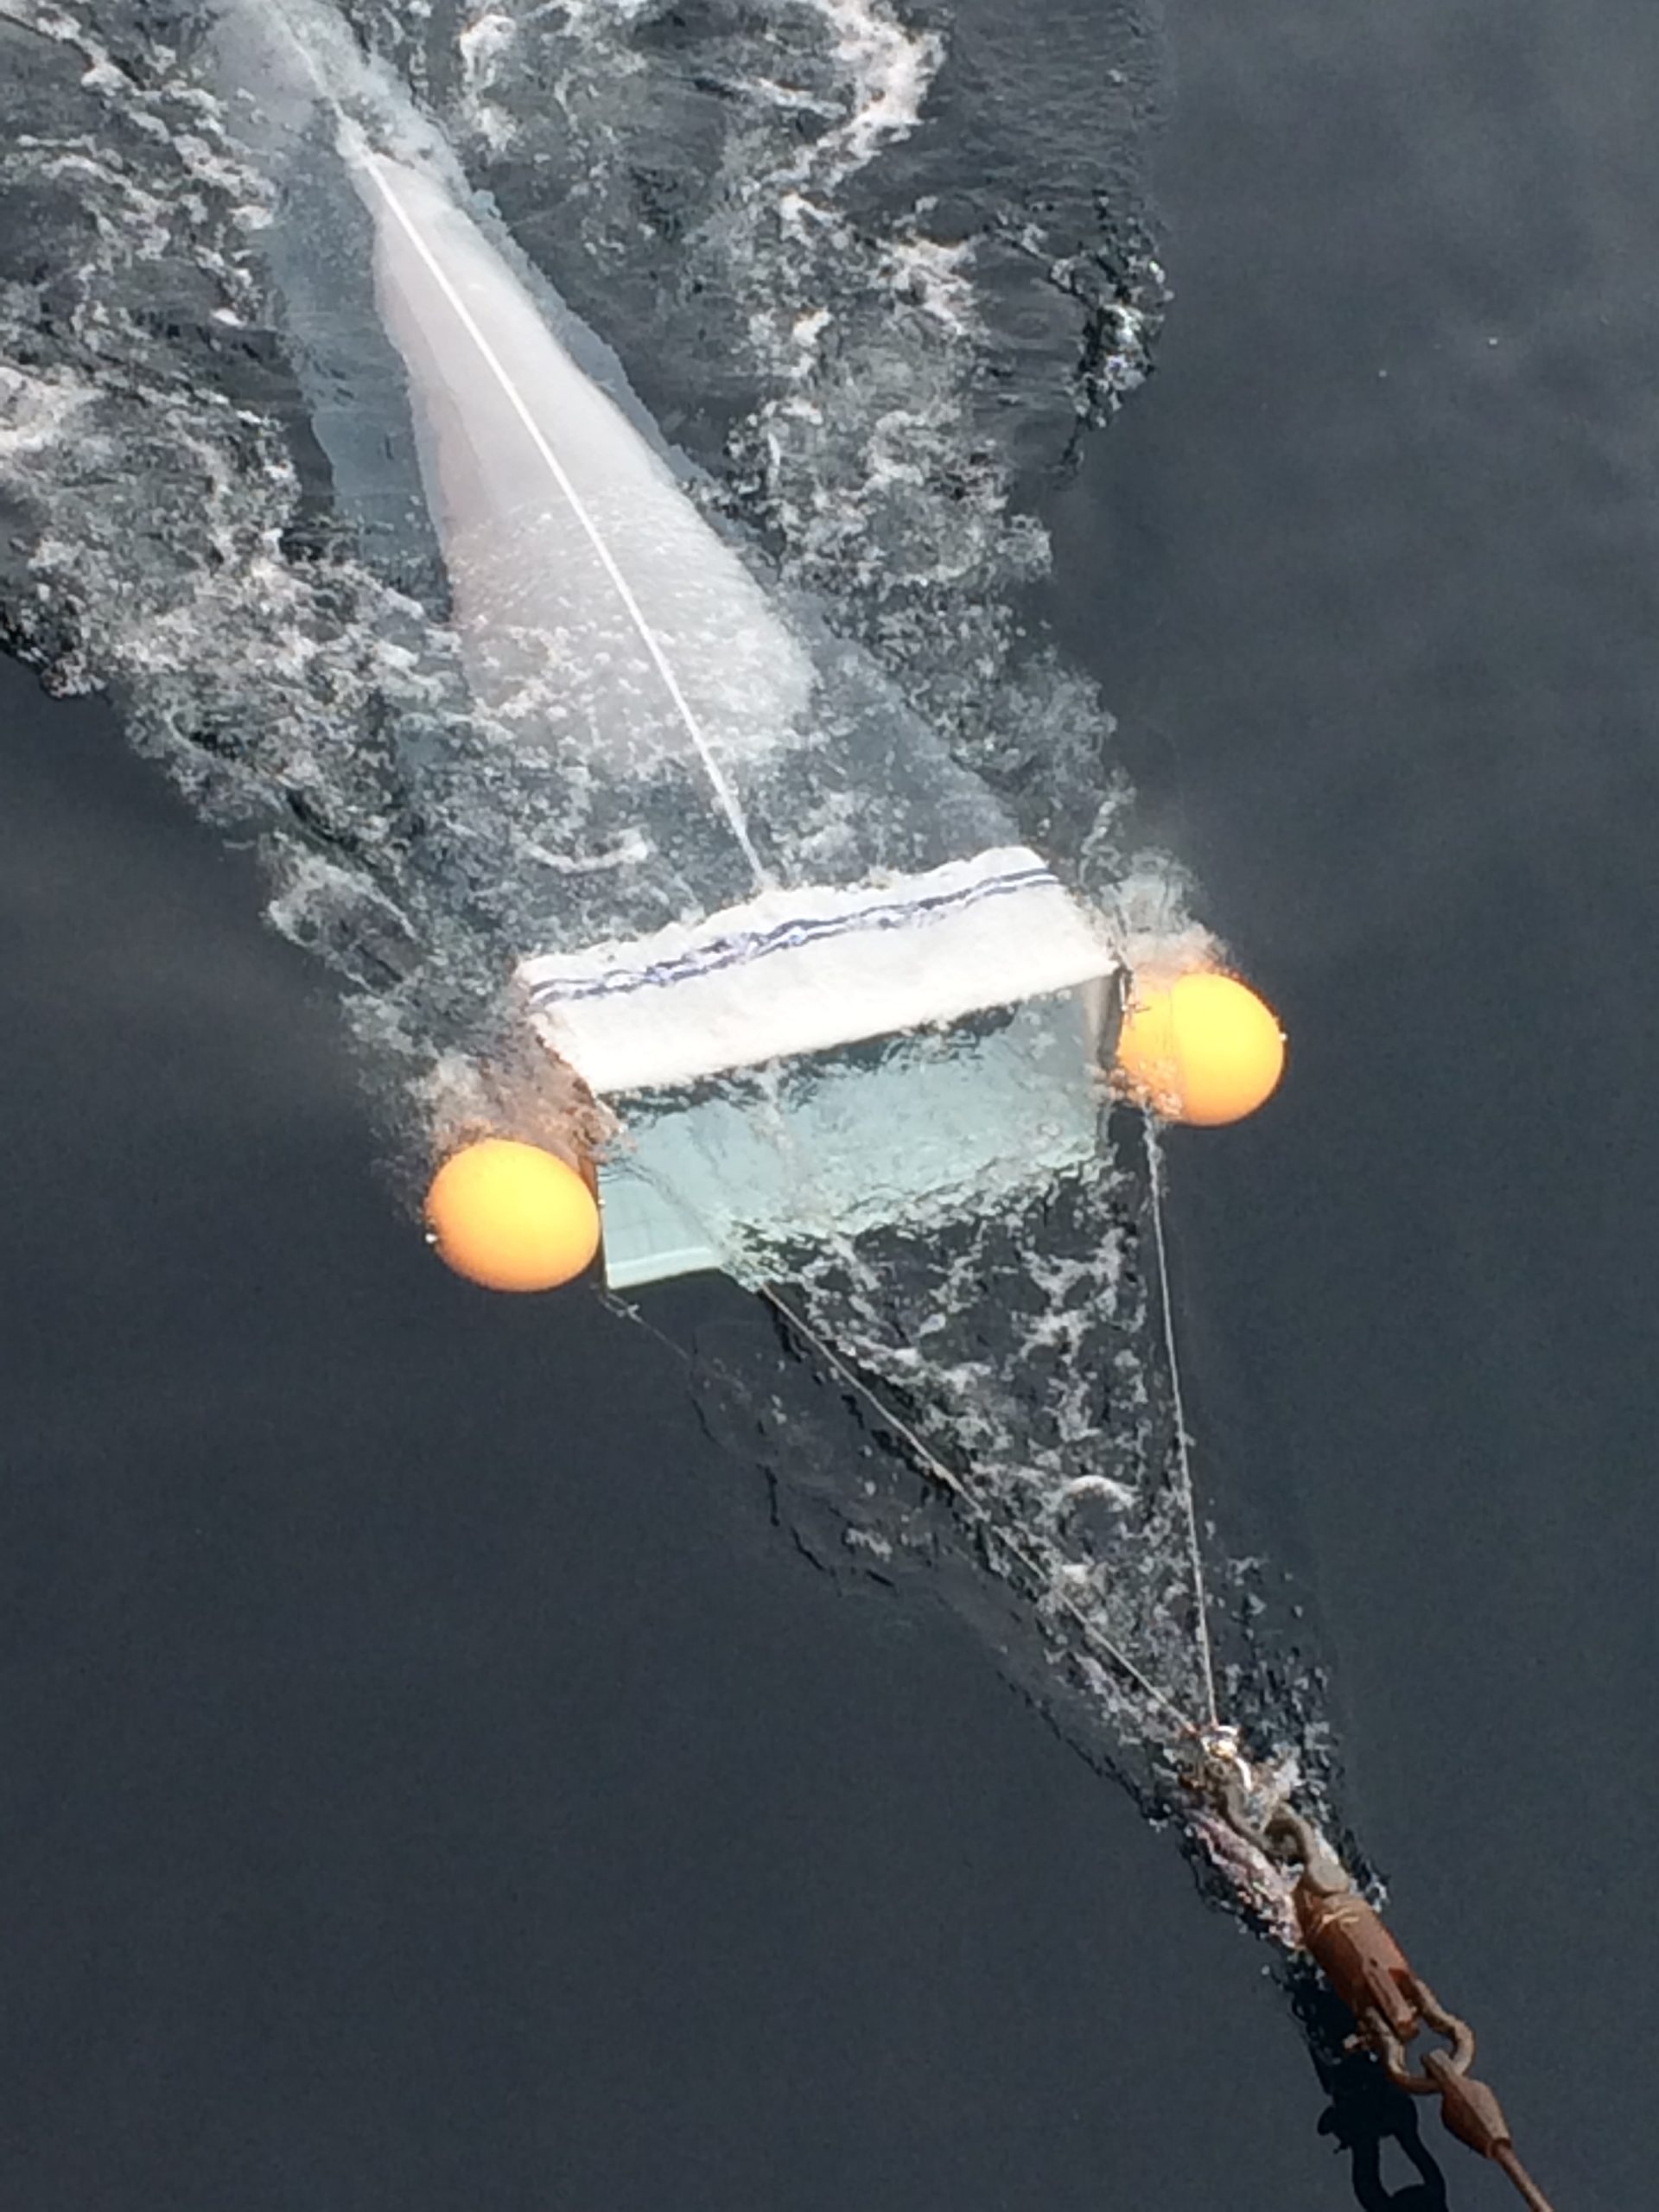 A net being dragged though the water